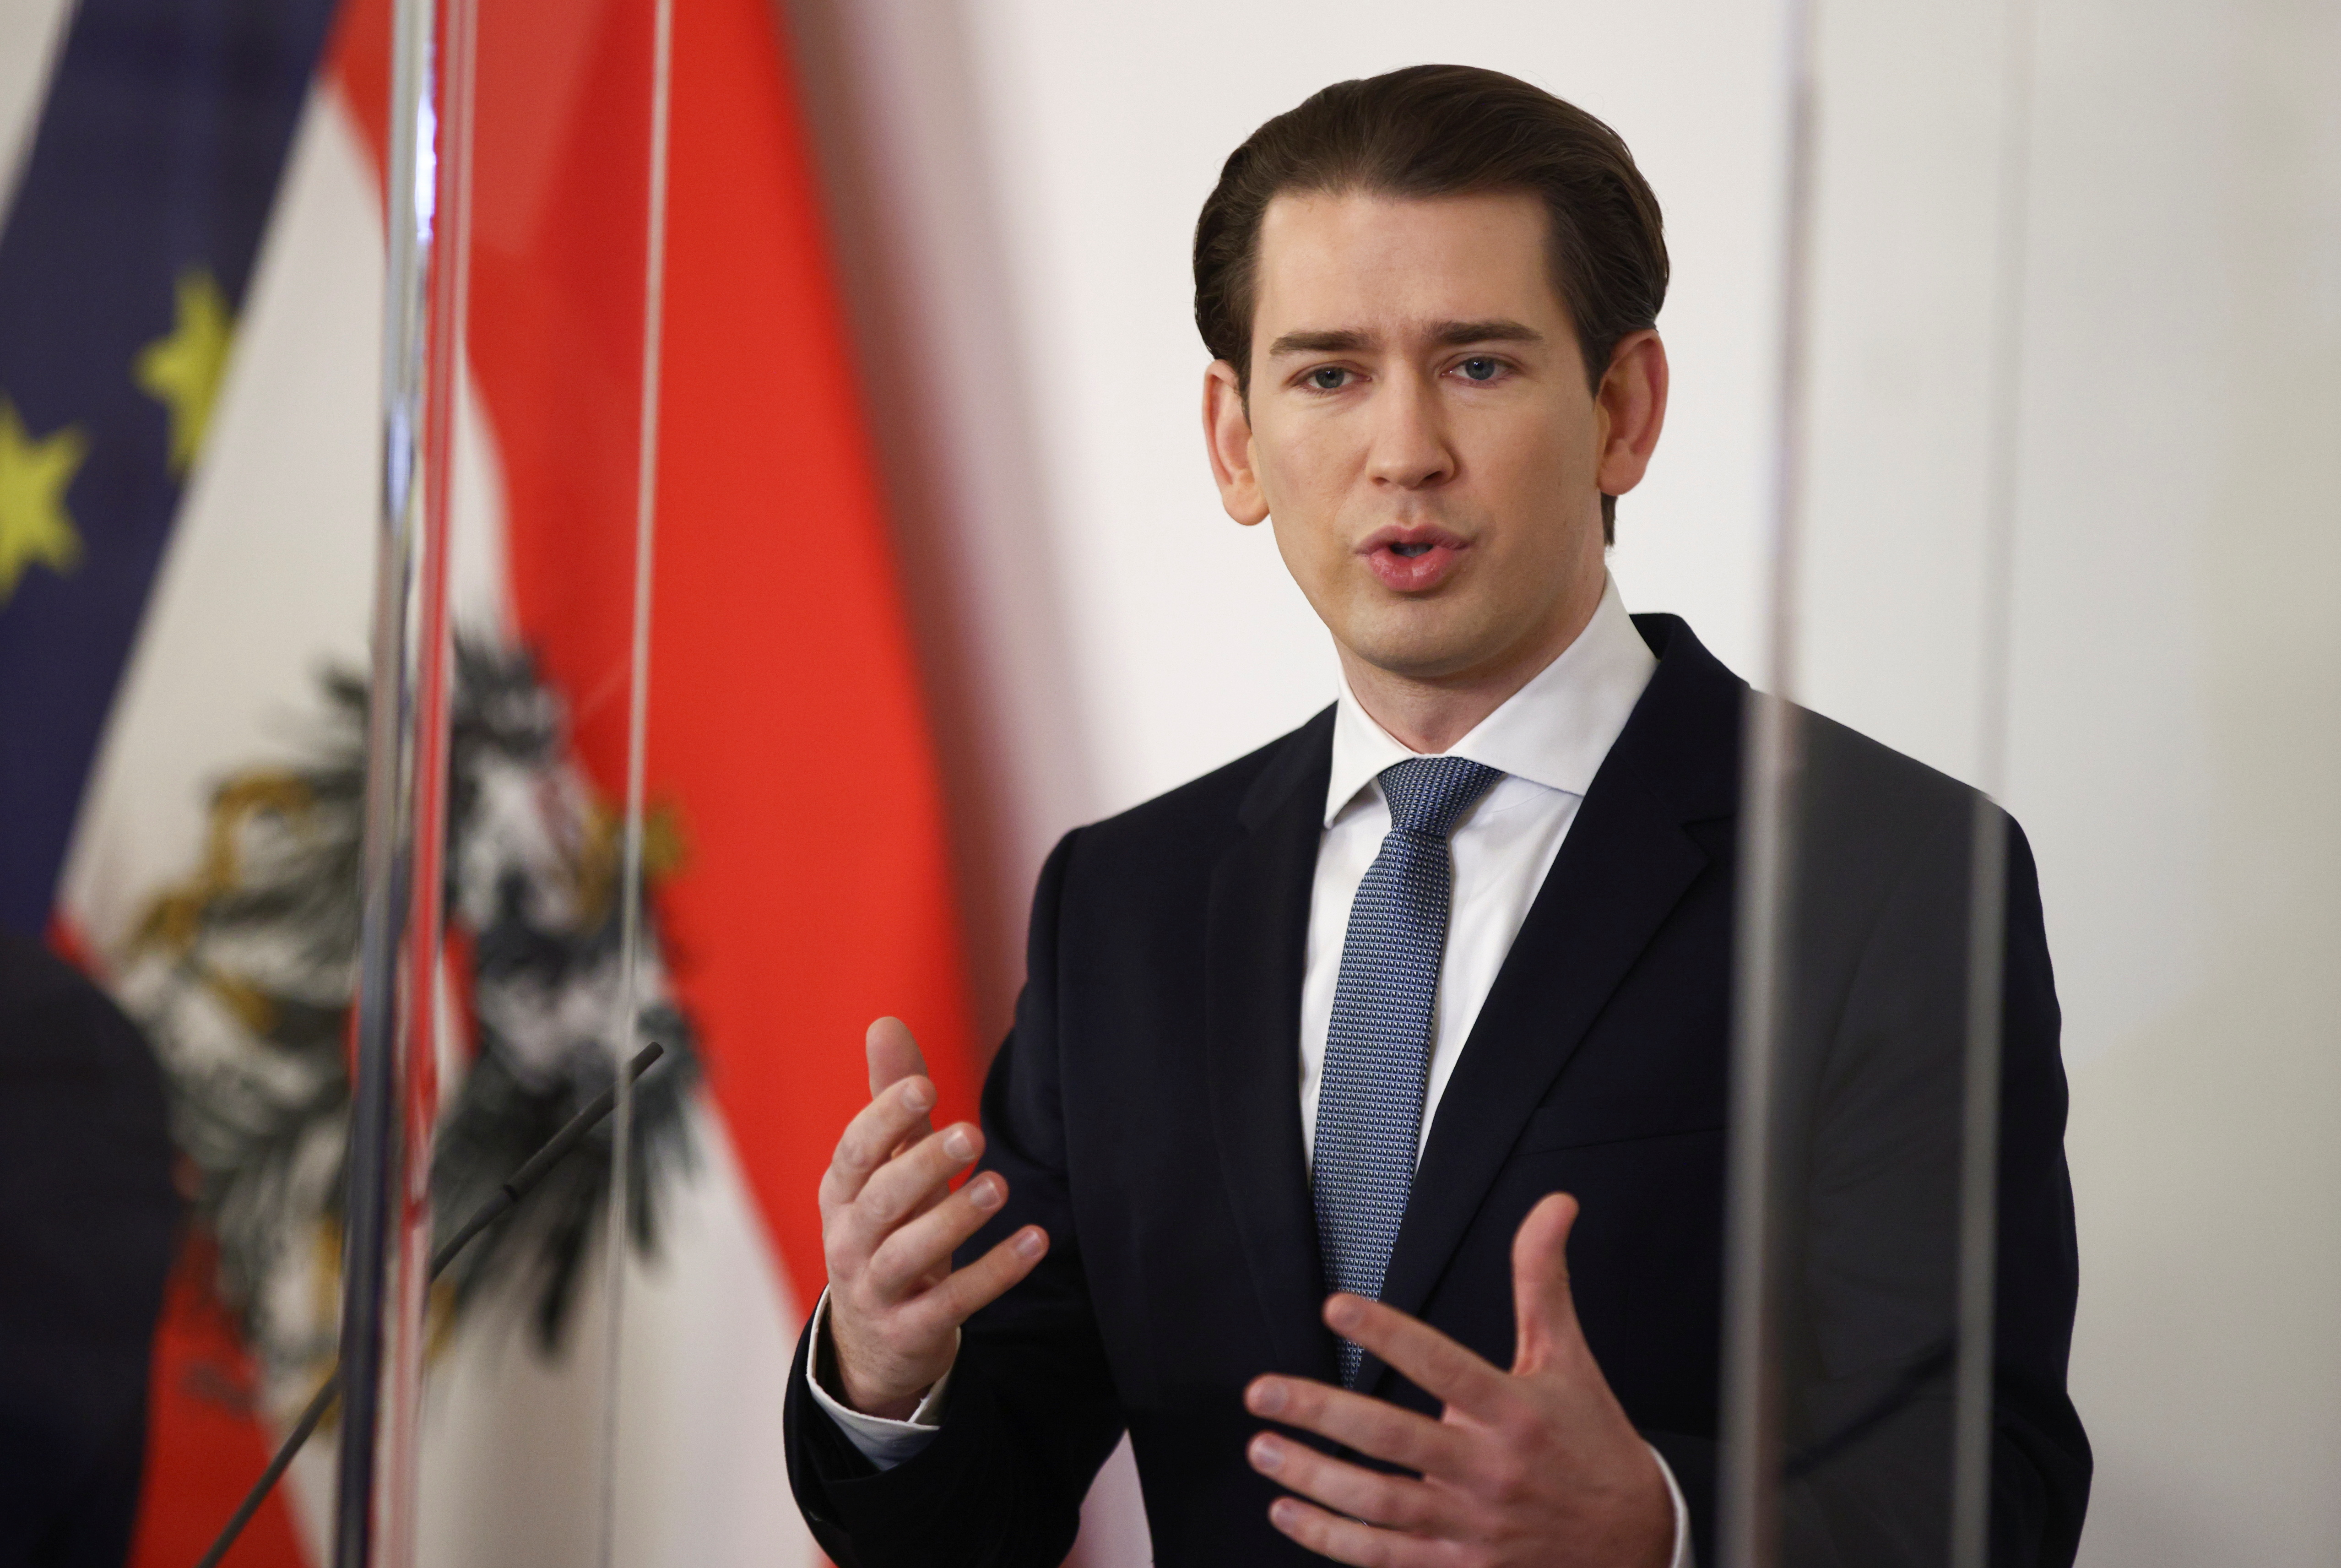 Austria's Chancellor Kurz holds a news conference about COVID-19 restrictions, in Vienna